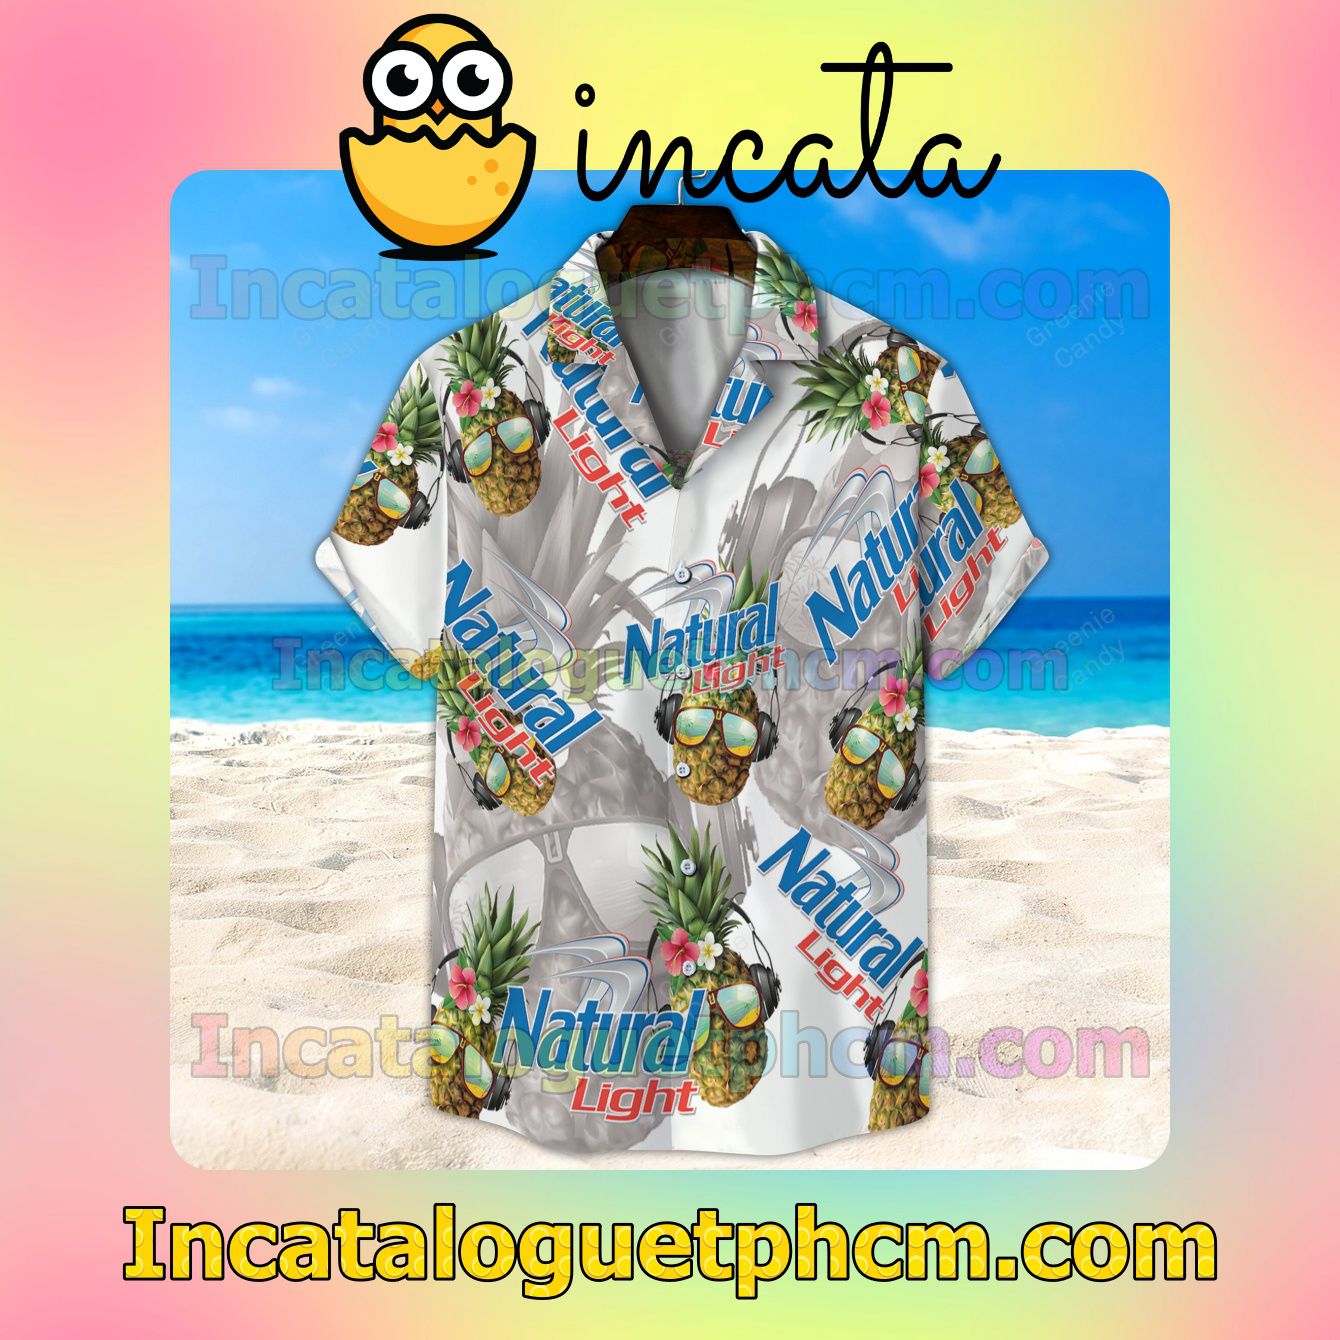 Natural Light Funny Pineapple Button Shirt And Swim Trunk